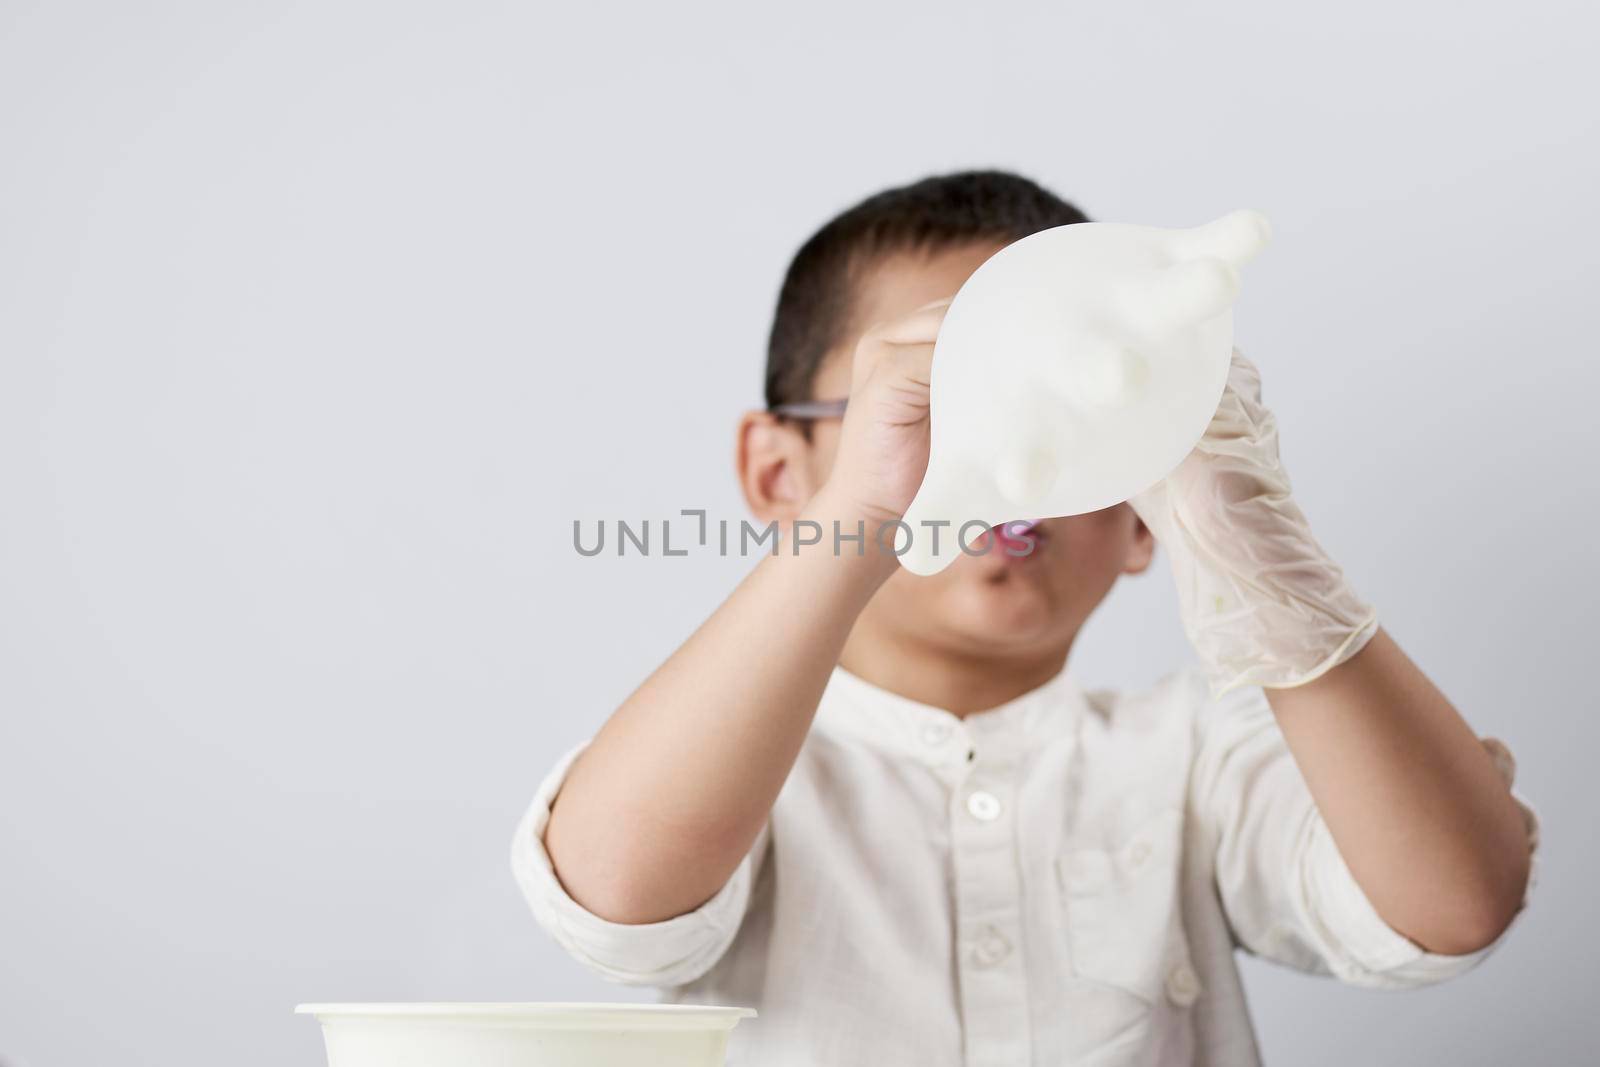 A little kid blowing medical gloves as balloon against the white background